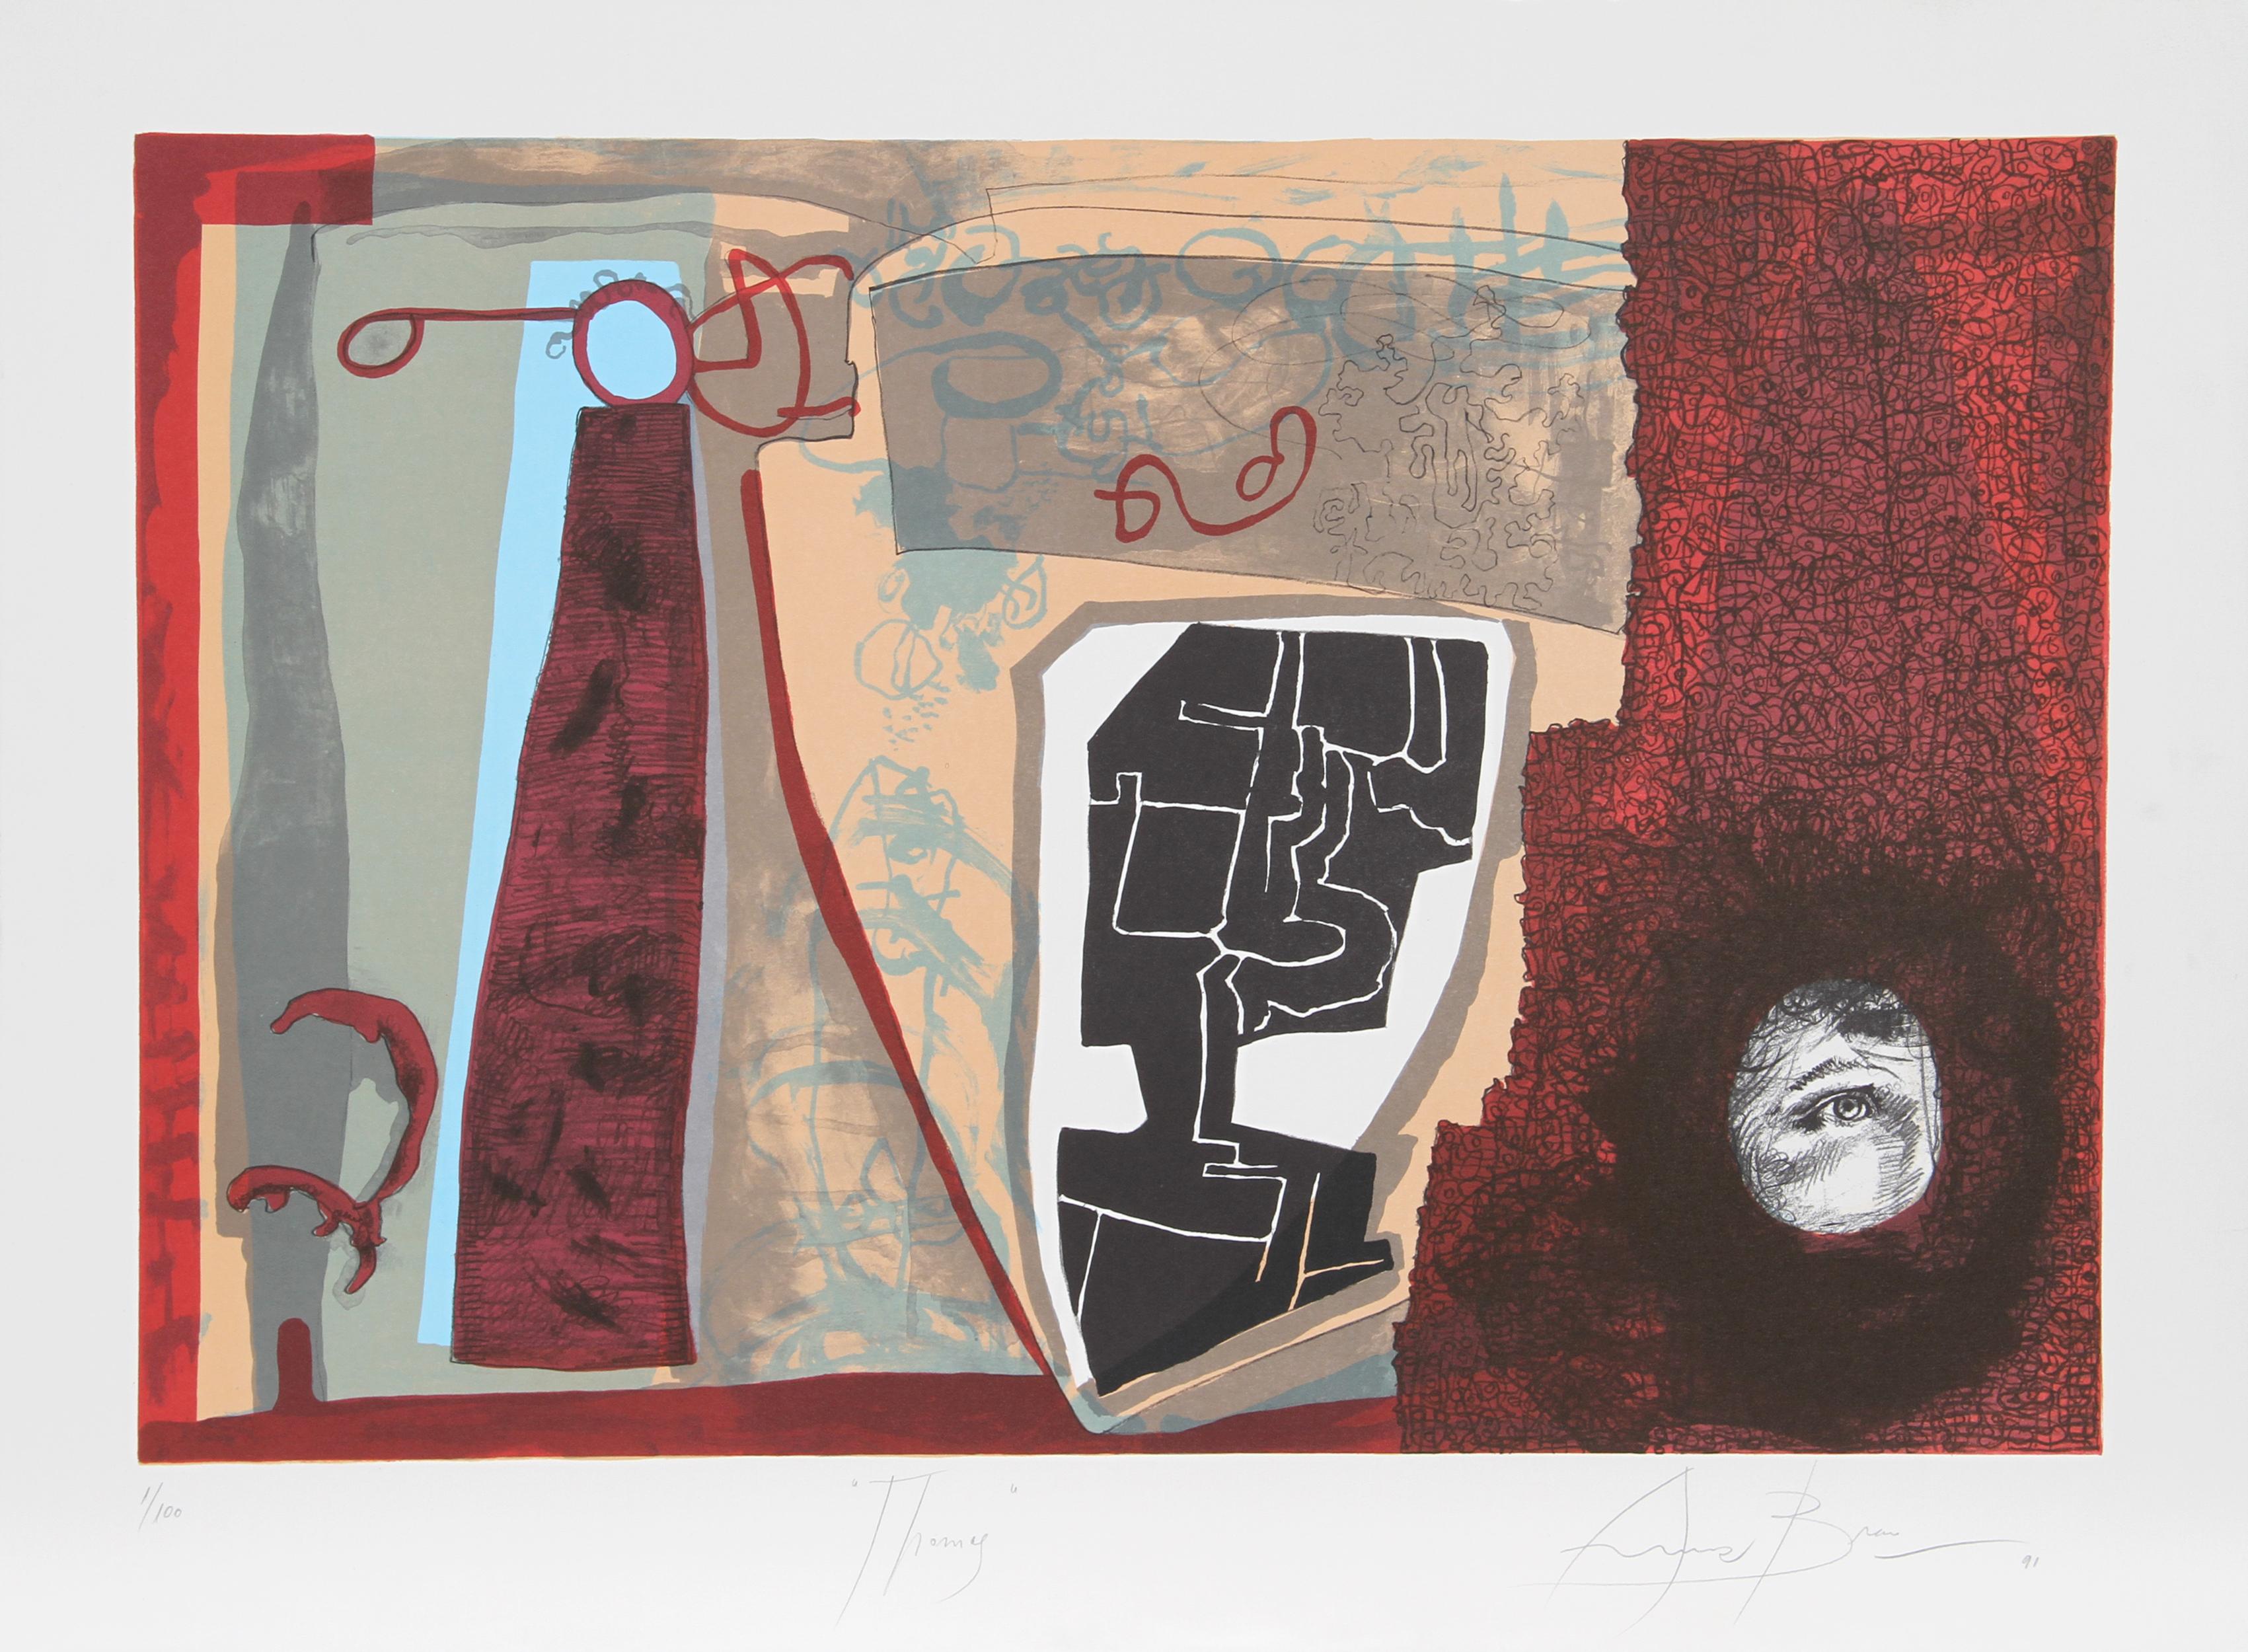 Suite of Five Lithographs on Arches, each signed and numbered in pencil by Eduardo Arranz-Bravo, Spanish (1941 - )
Title: The Romantics Suite (Jerry, Peter, Reggie, Roger, Thomas)
Year: 1991
Edition: 100
Image Size: 17 x 25.5 inches 
Paper Size: 22